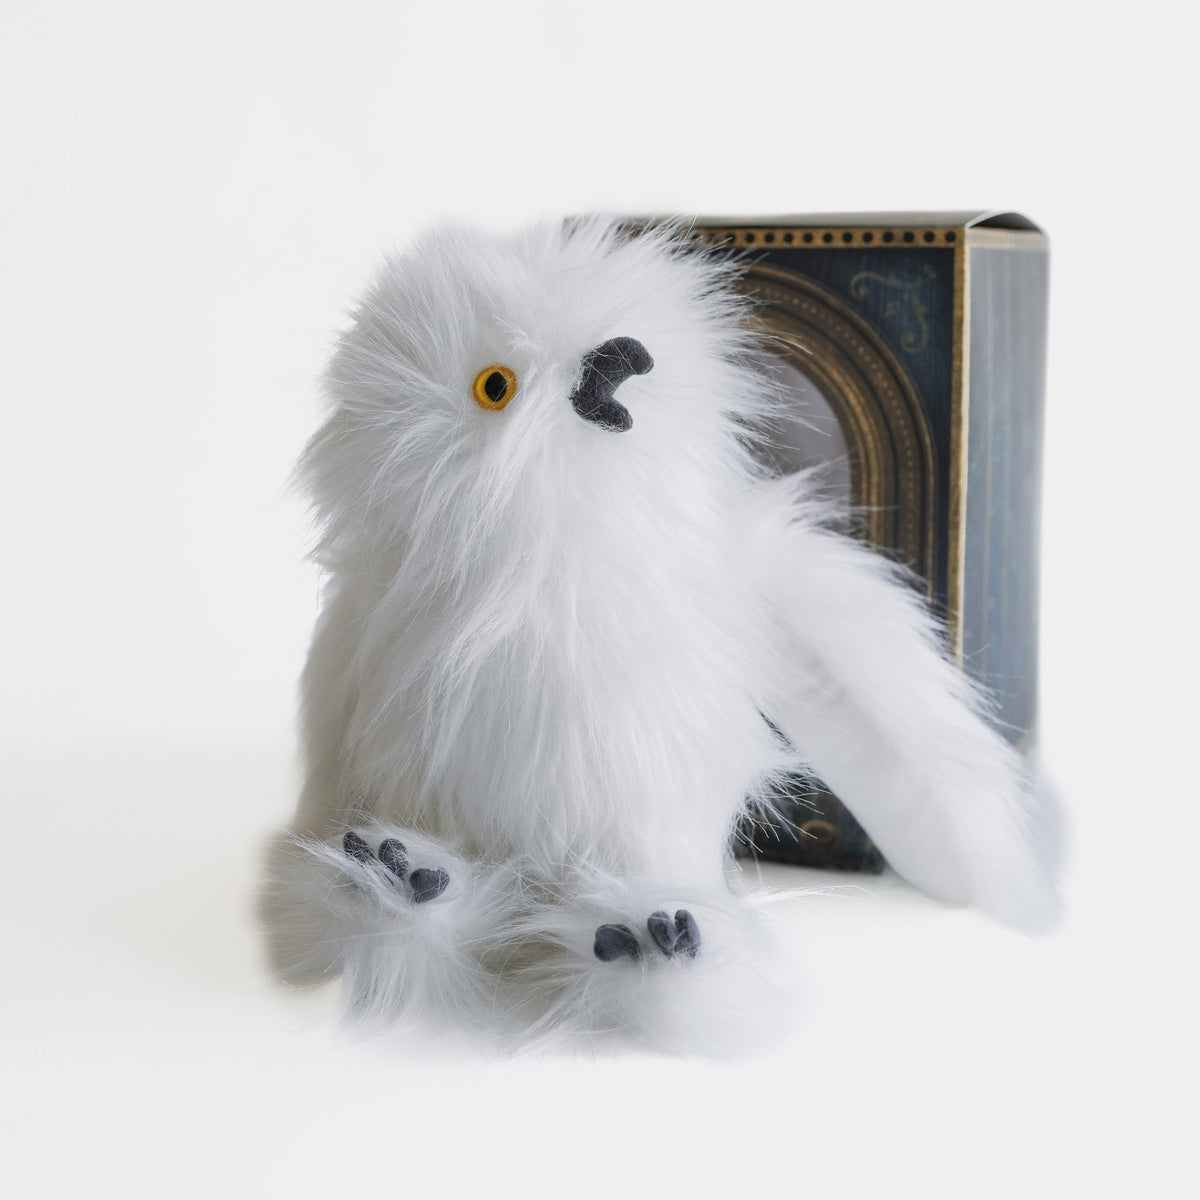 Adopt a Magical White Owl Plush from LitJoy Crate | Collectibles &amp; Gifts for Booklovers